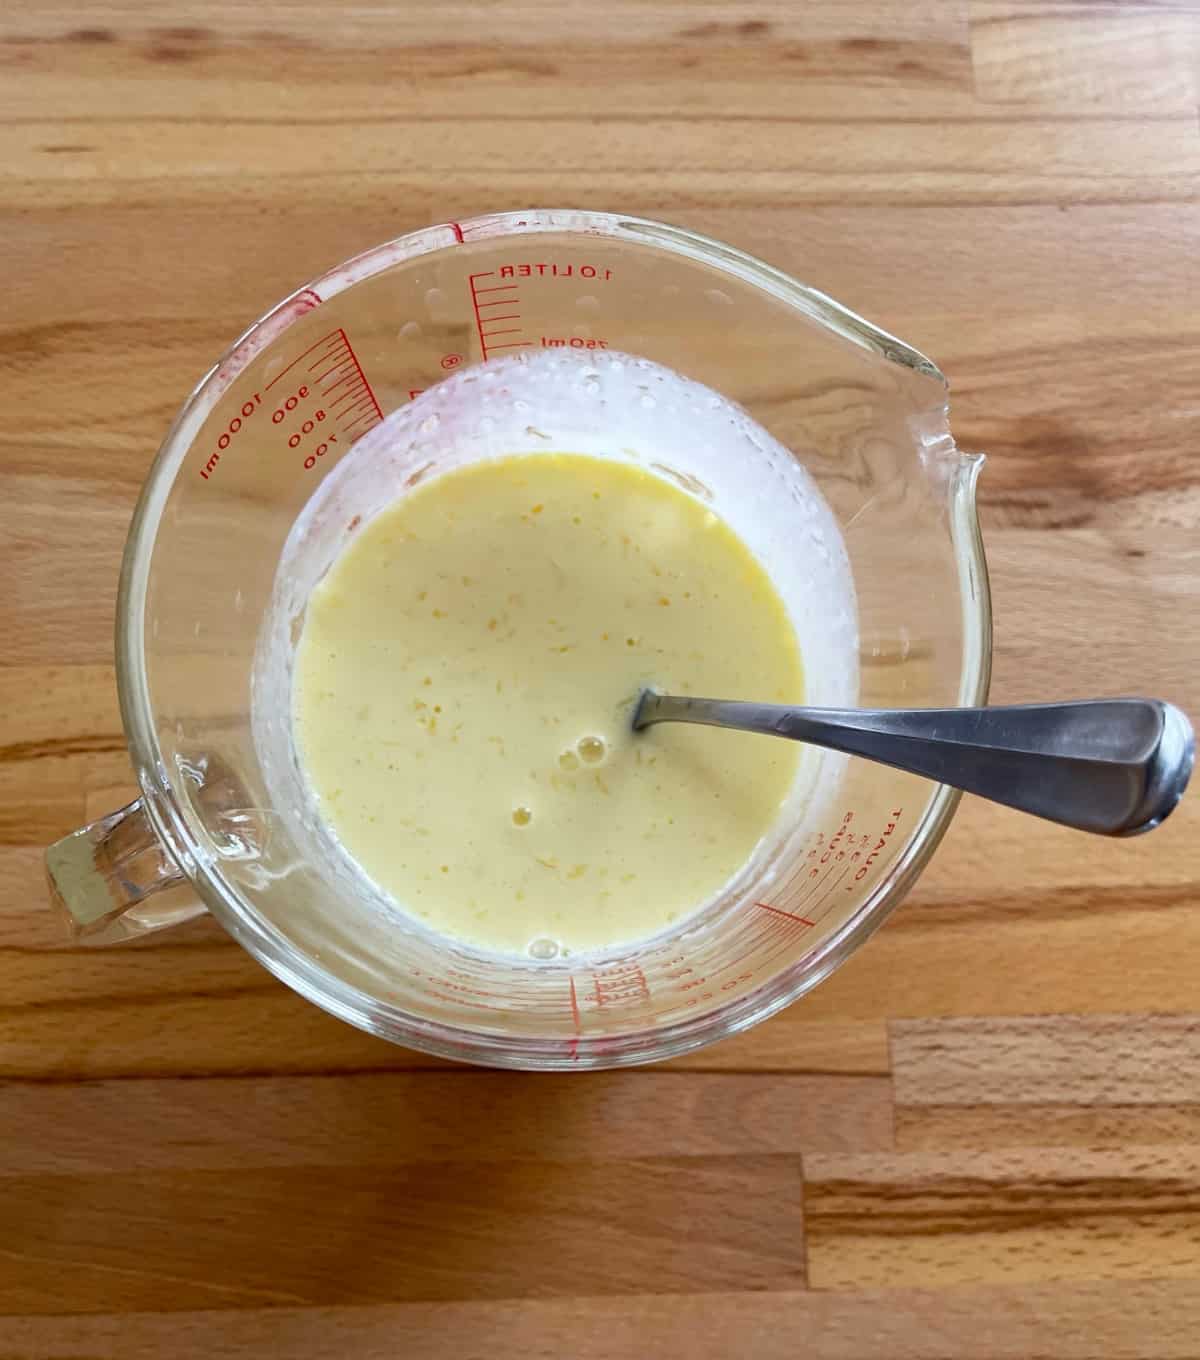 Mixing egg yolks, melted butter and buttermilk in glass measuring cup.